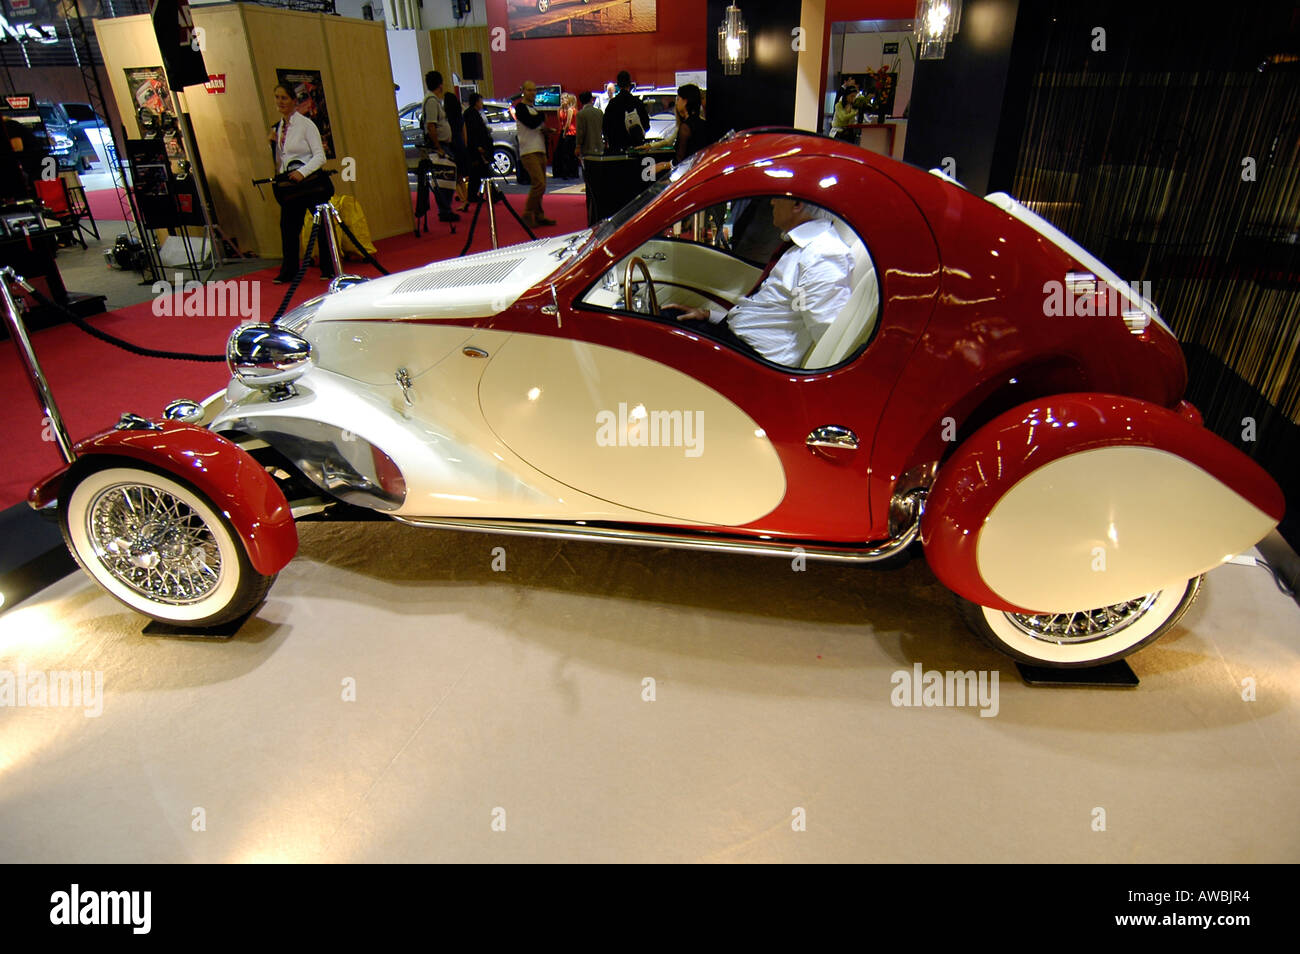 A new car including some retro designing exhibited at the Paris World Car Exhibition Stock Photo